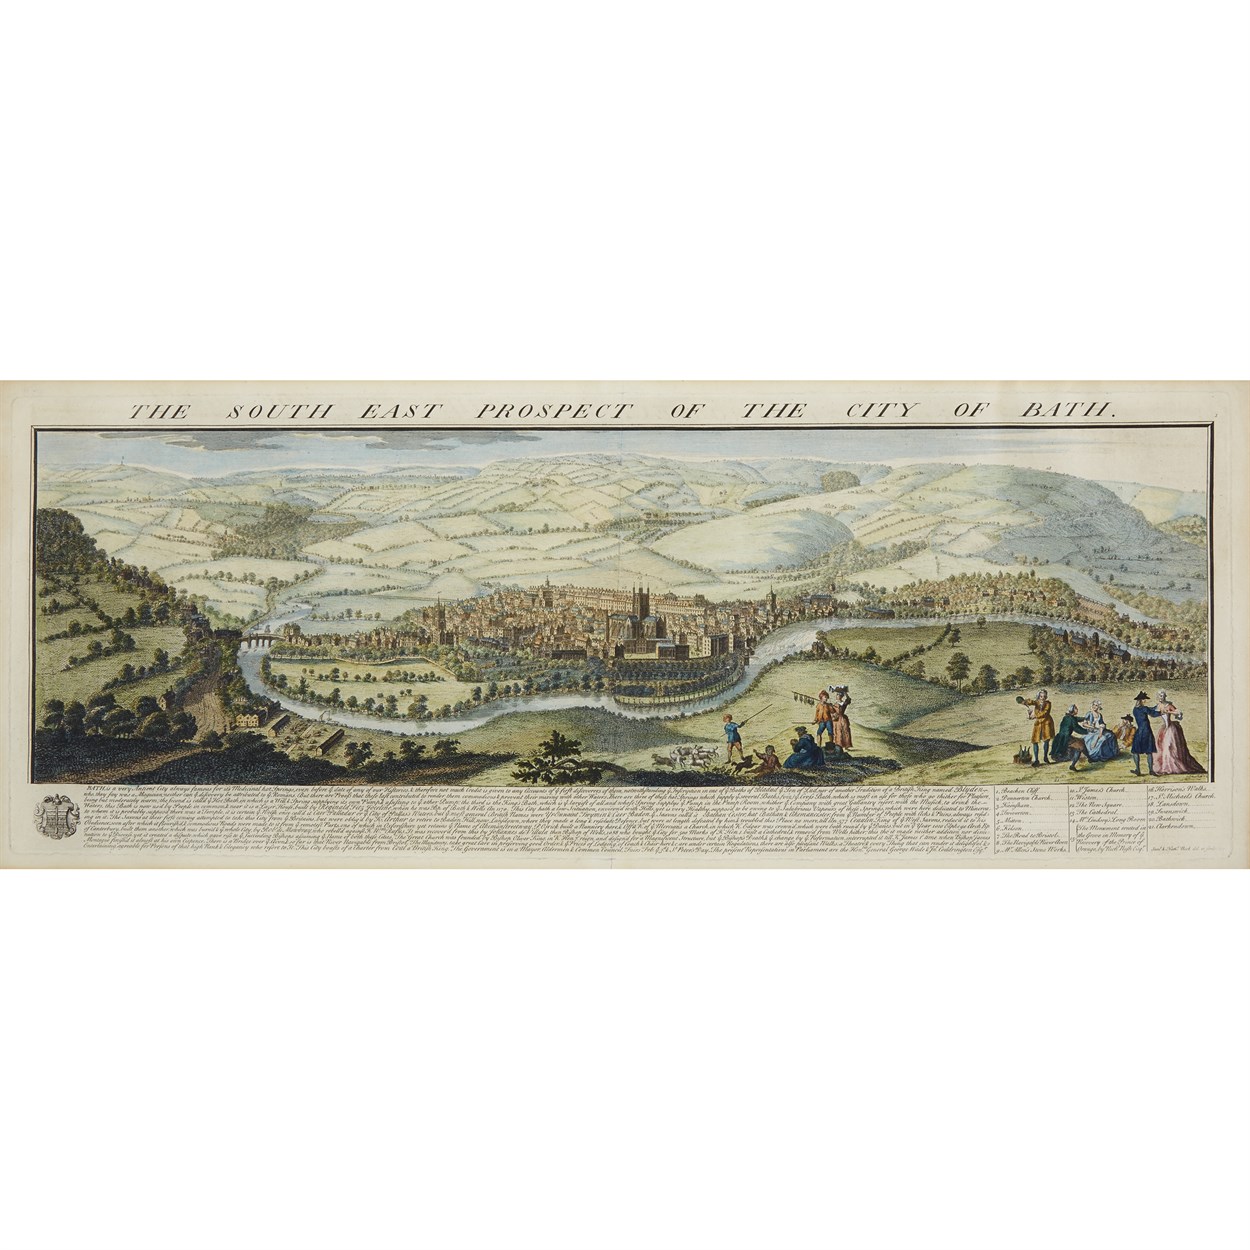 Lot 79 - 1 Piece. Hand-colored Engraving. Buck, S.& N. "...